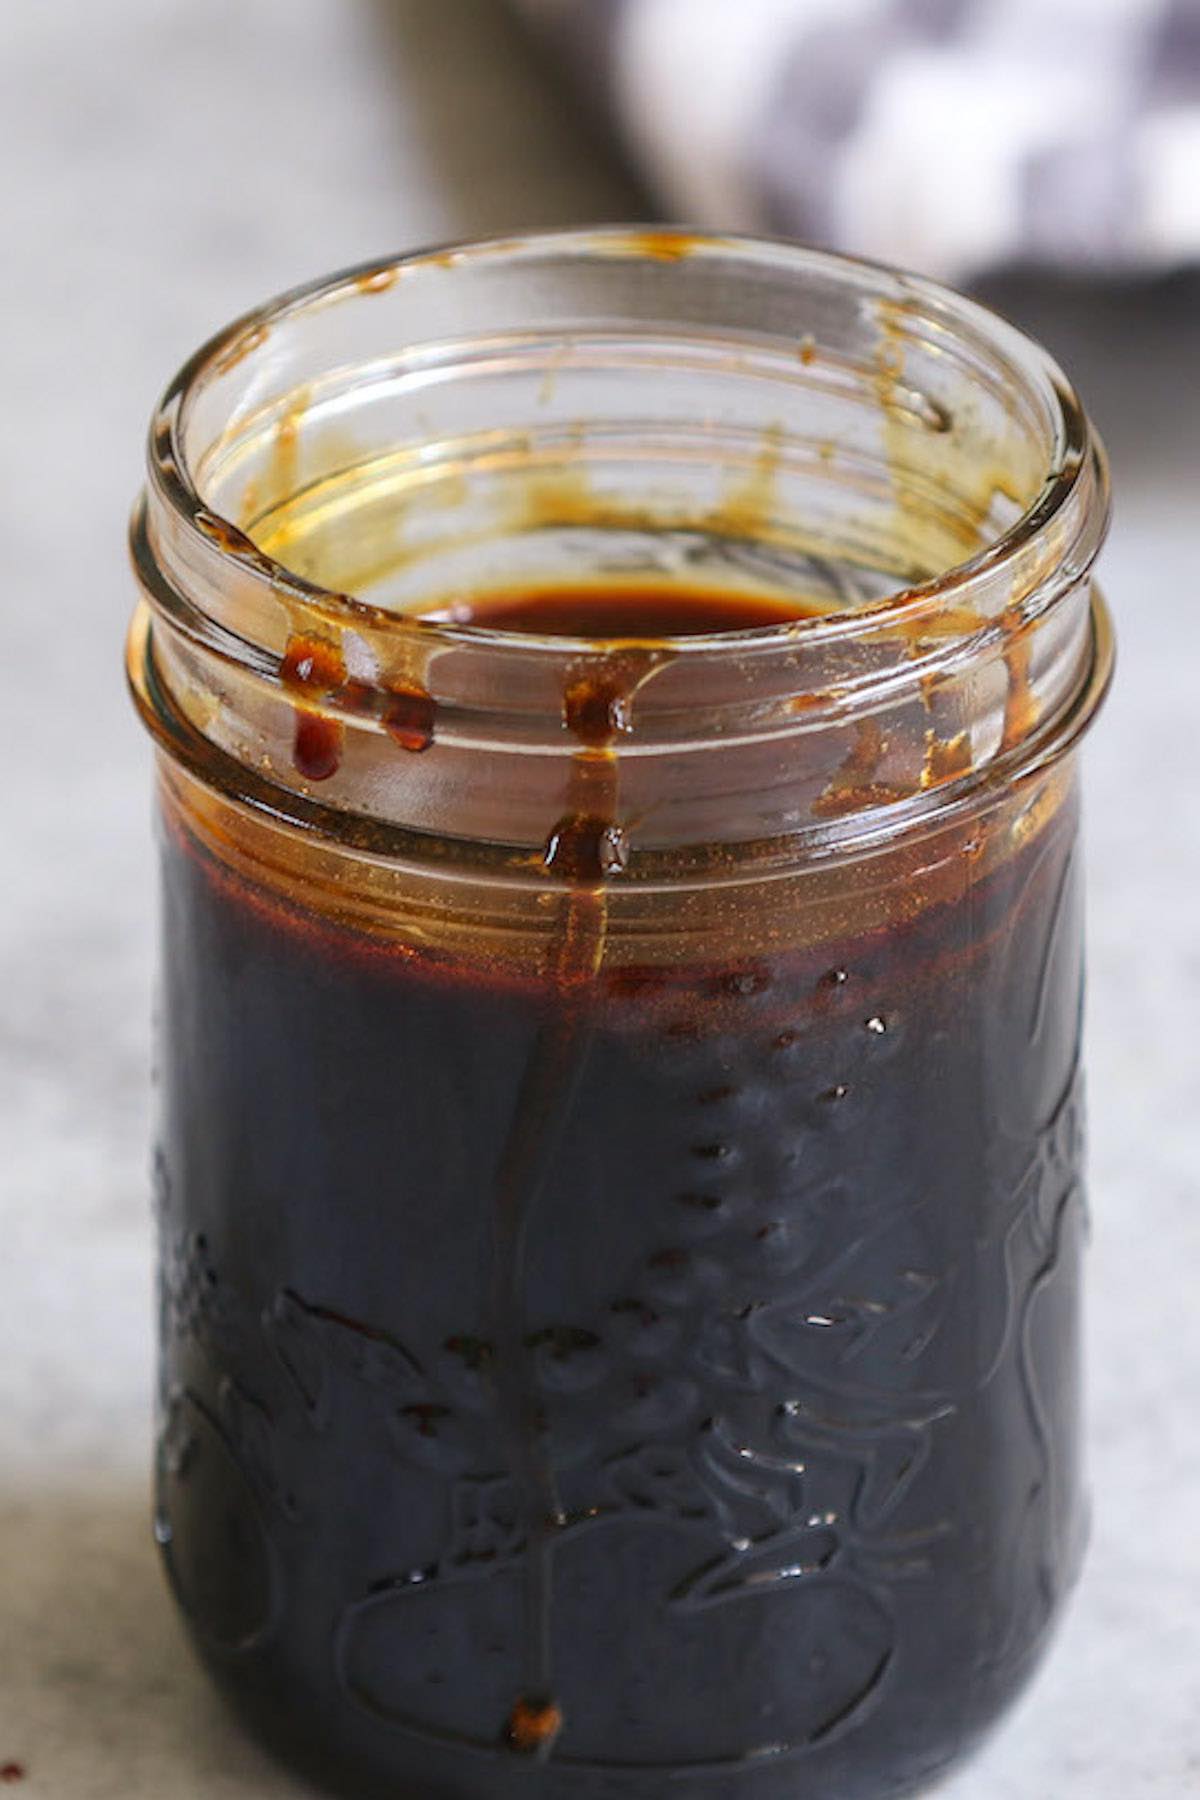 This homemade Unagi Sauce or Eel Sauce is sticky, sweet, savory, and flavorful! Popular in Japanese cuisine, it’s traditionally used on grilled eel (unagi), barbeque dishes and sushi rolls. Unagi sauce is made by simmering 4 simple ingredients to a sugary, salty reduction that’s perfect atop your favorite dish.